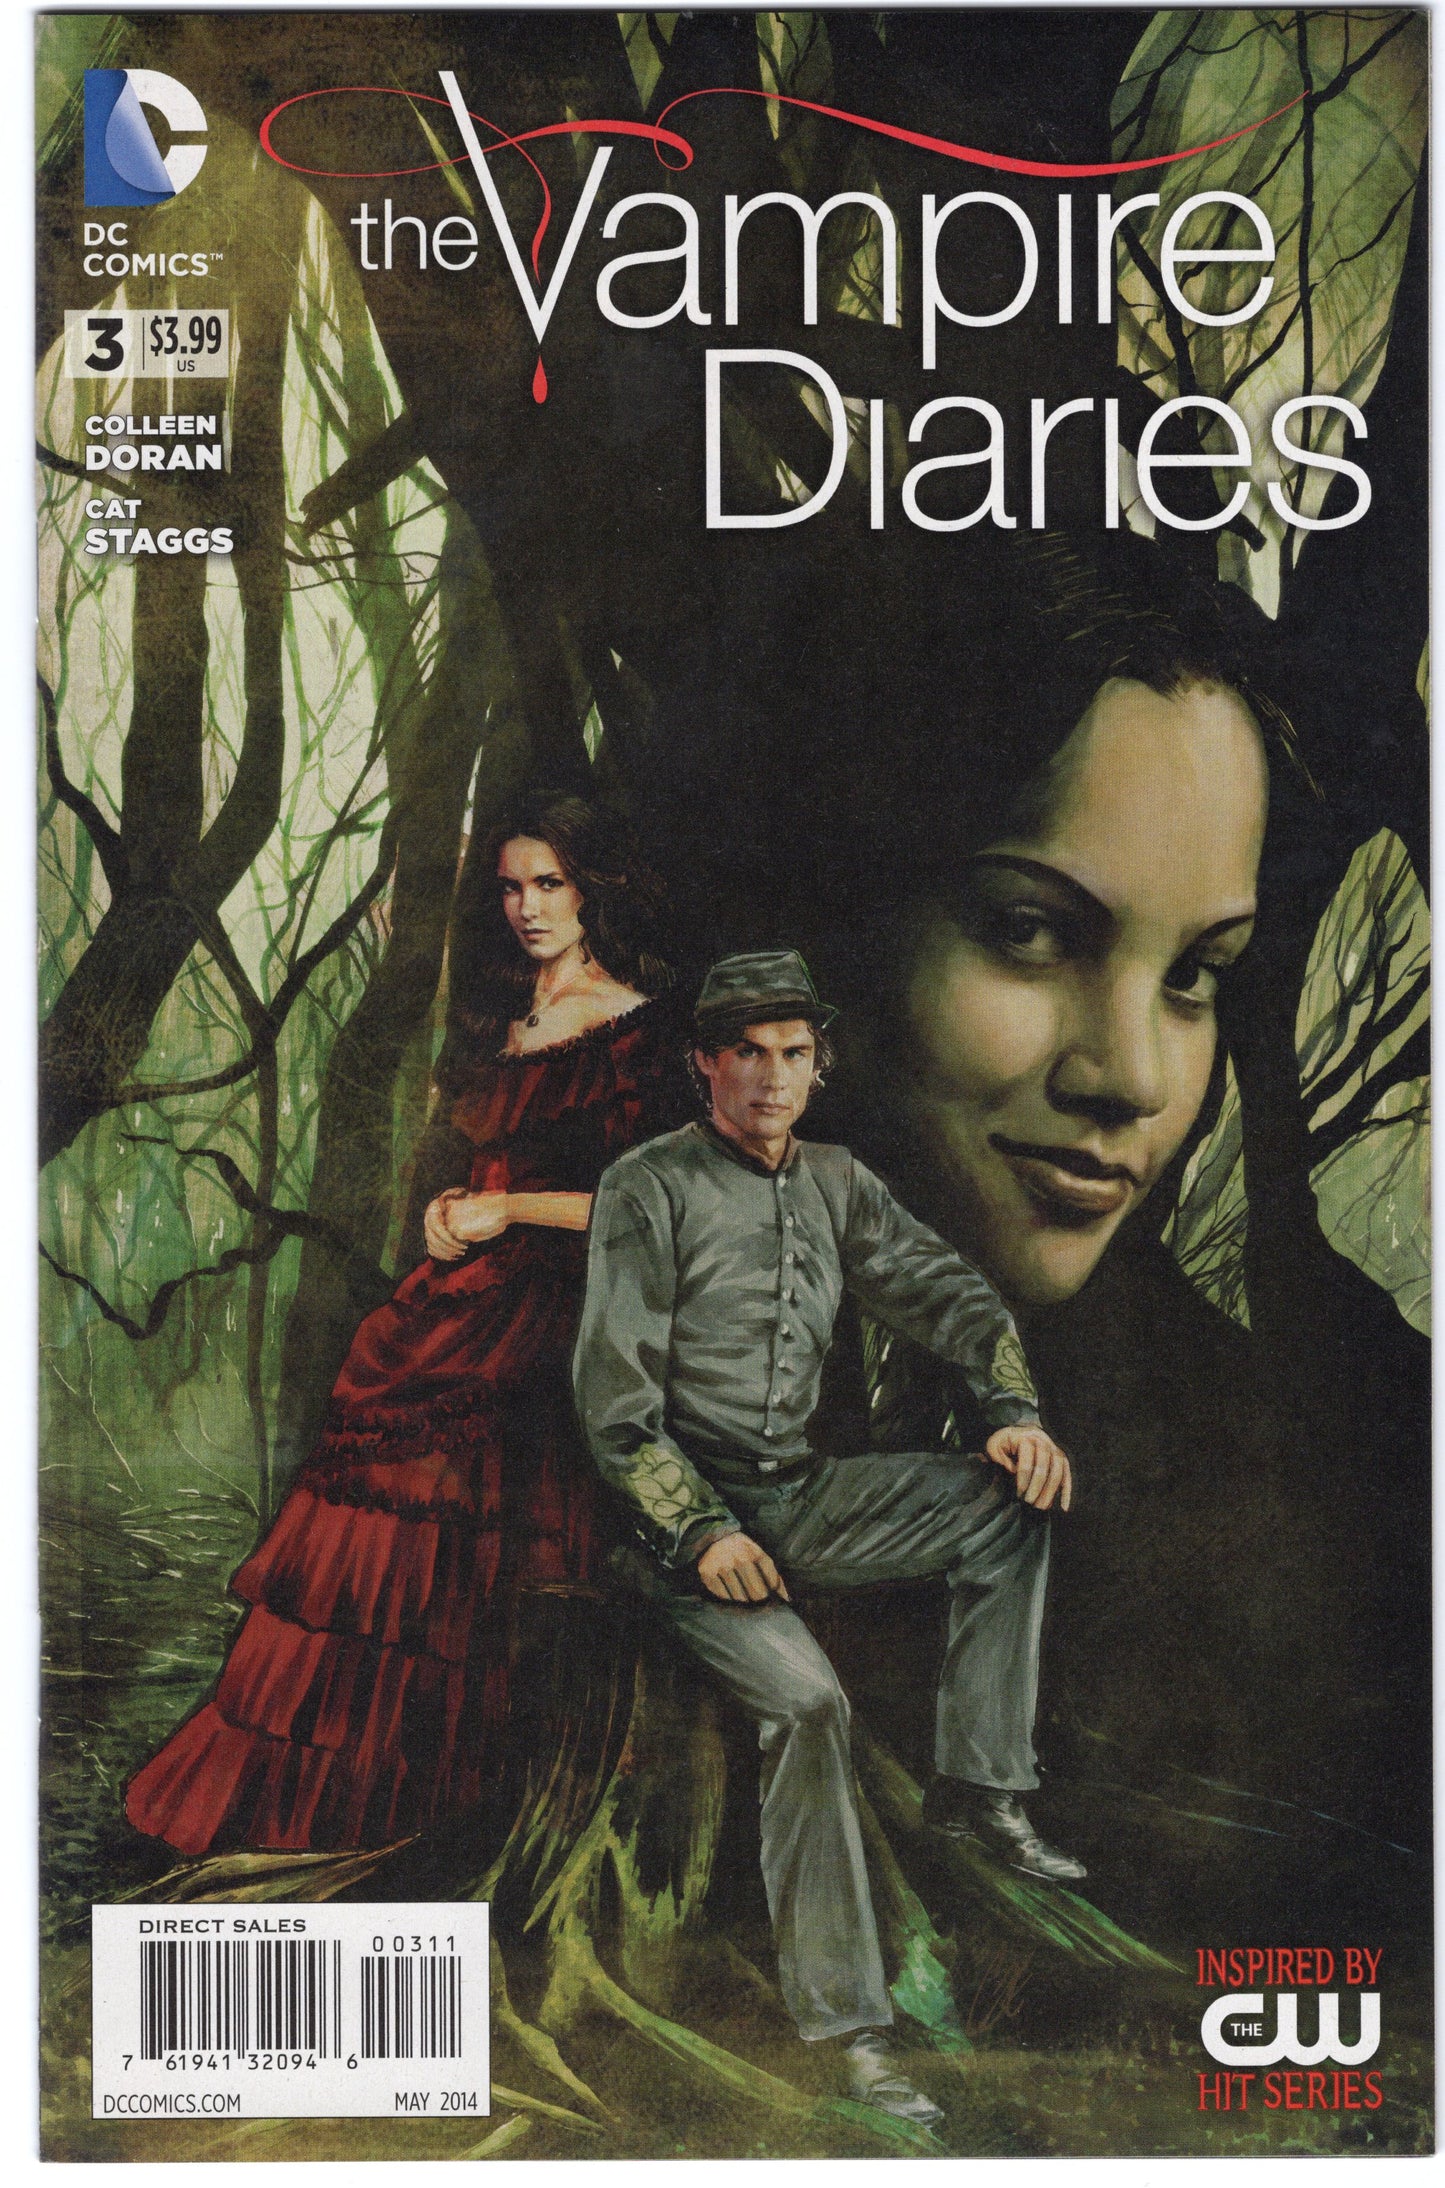 The Vampire Diaries - Issue #3 (May 2014 - DC Comics) NM-